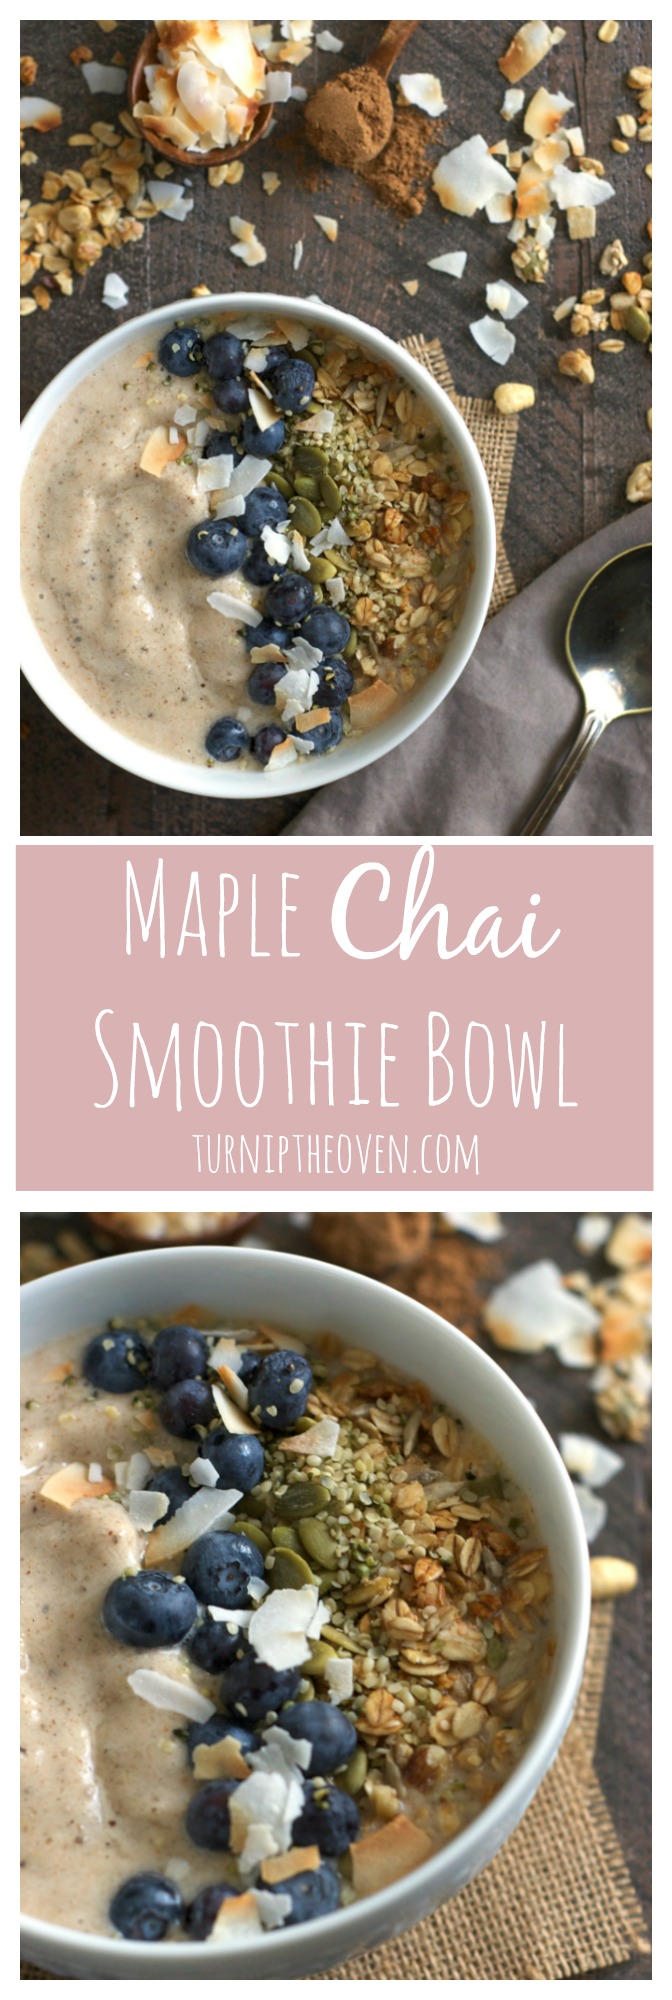 Sweet, smoky maple syrup and spicy chai are a perfect match in this easy, gluten-free, vegan smoothie bowl. Get the recipe and don't forget to load on the toppings!